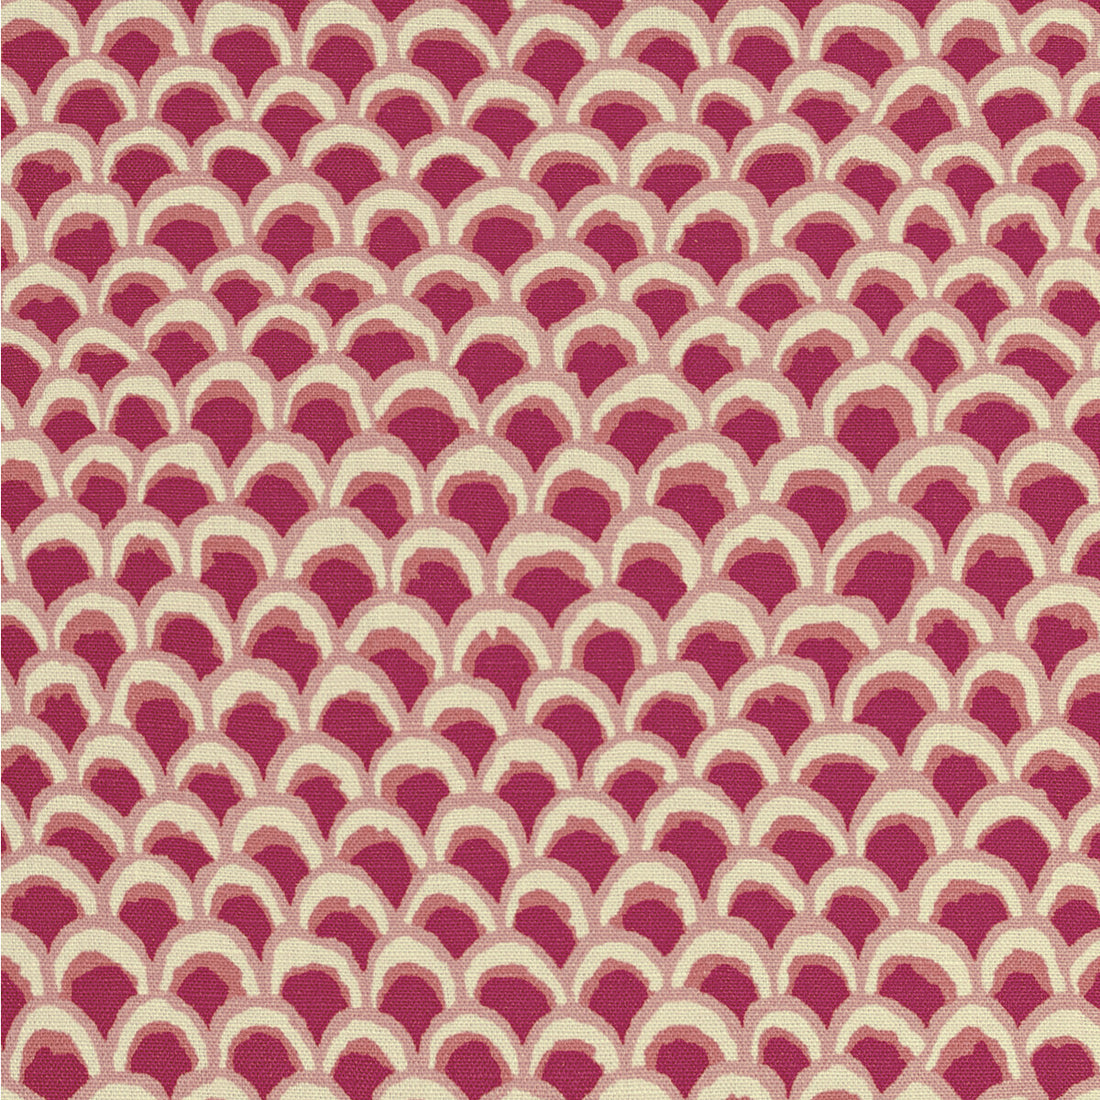 Pave II Print fabric in petal color - pattern 8020126.77.0 - by Brunschwig &amp; Fils in the Louverne collection